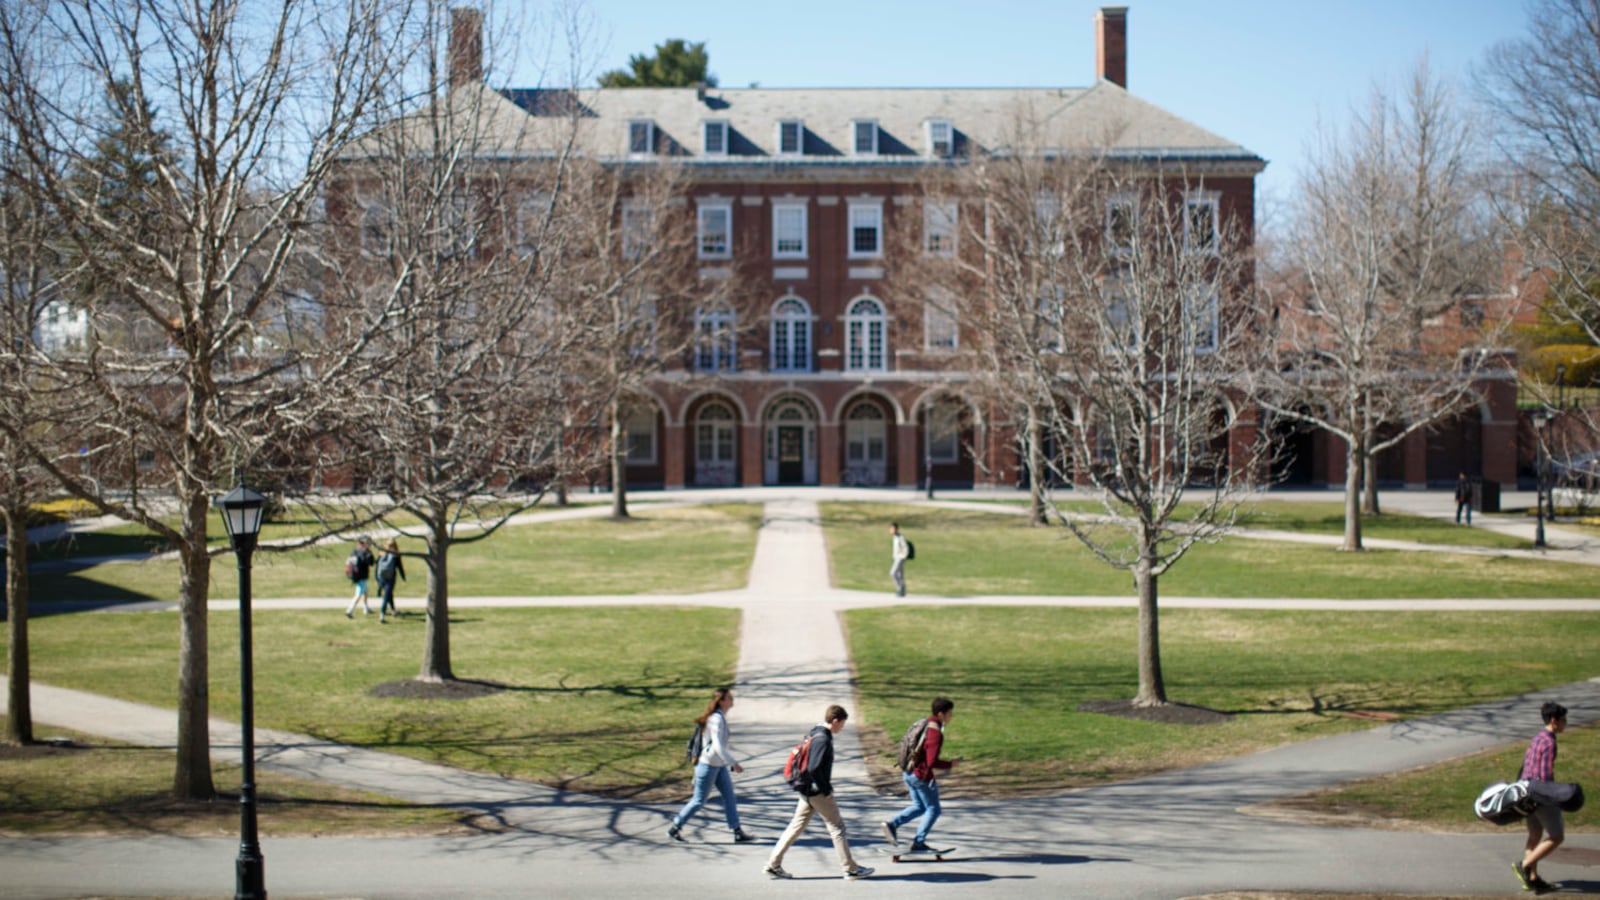 EXETER, NH - APRIL 14: The campus of Phillips Exeter Academy in Exeter, N.H. on April 14, 2016. (Photo by Dina Rudick/The Boston Globe via Getty Images)